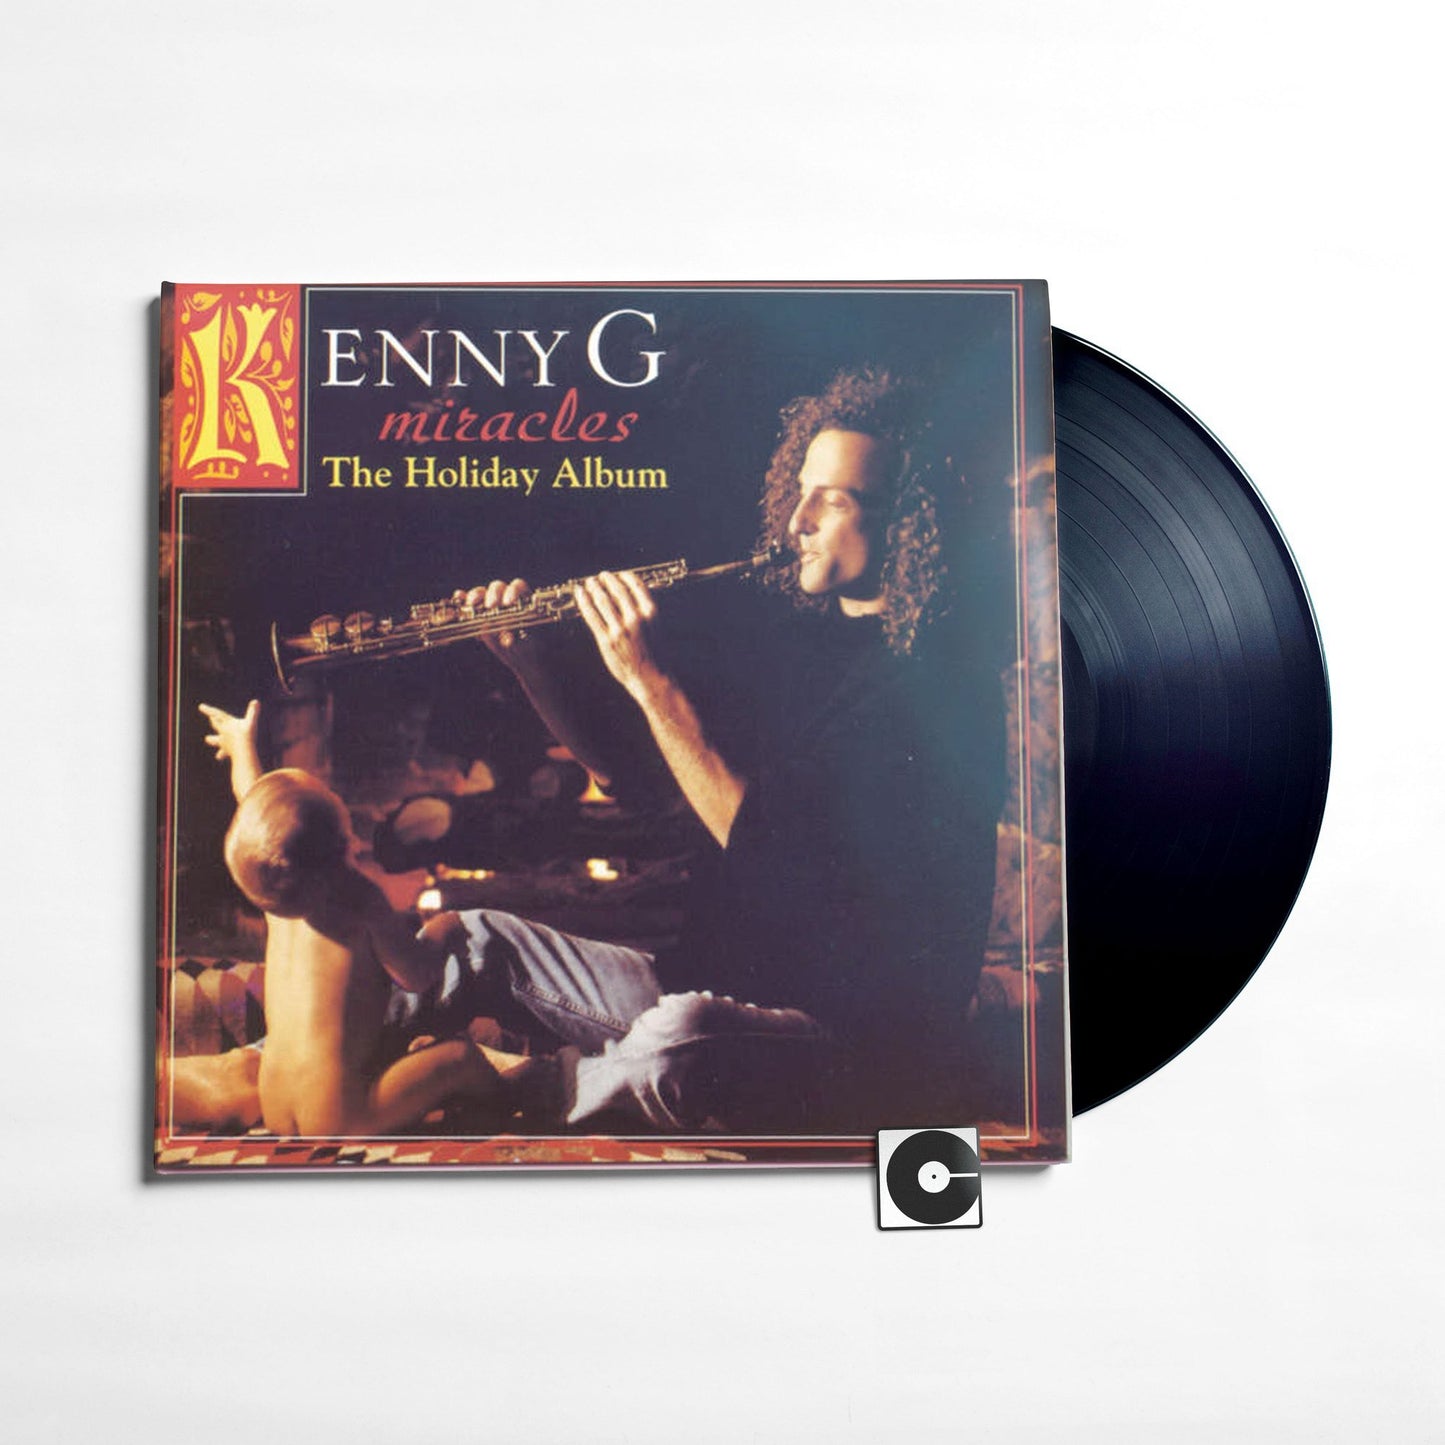 Kenny G - "Miracles: The Holiday Album"